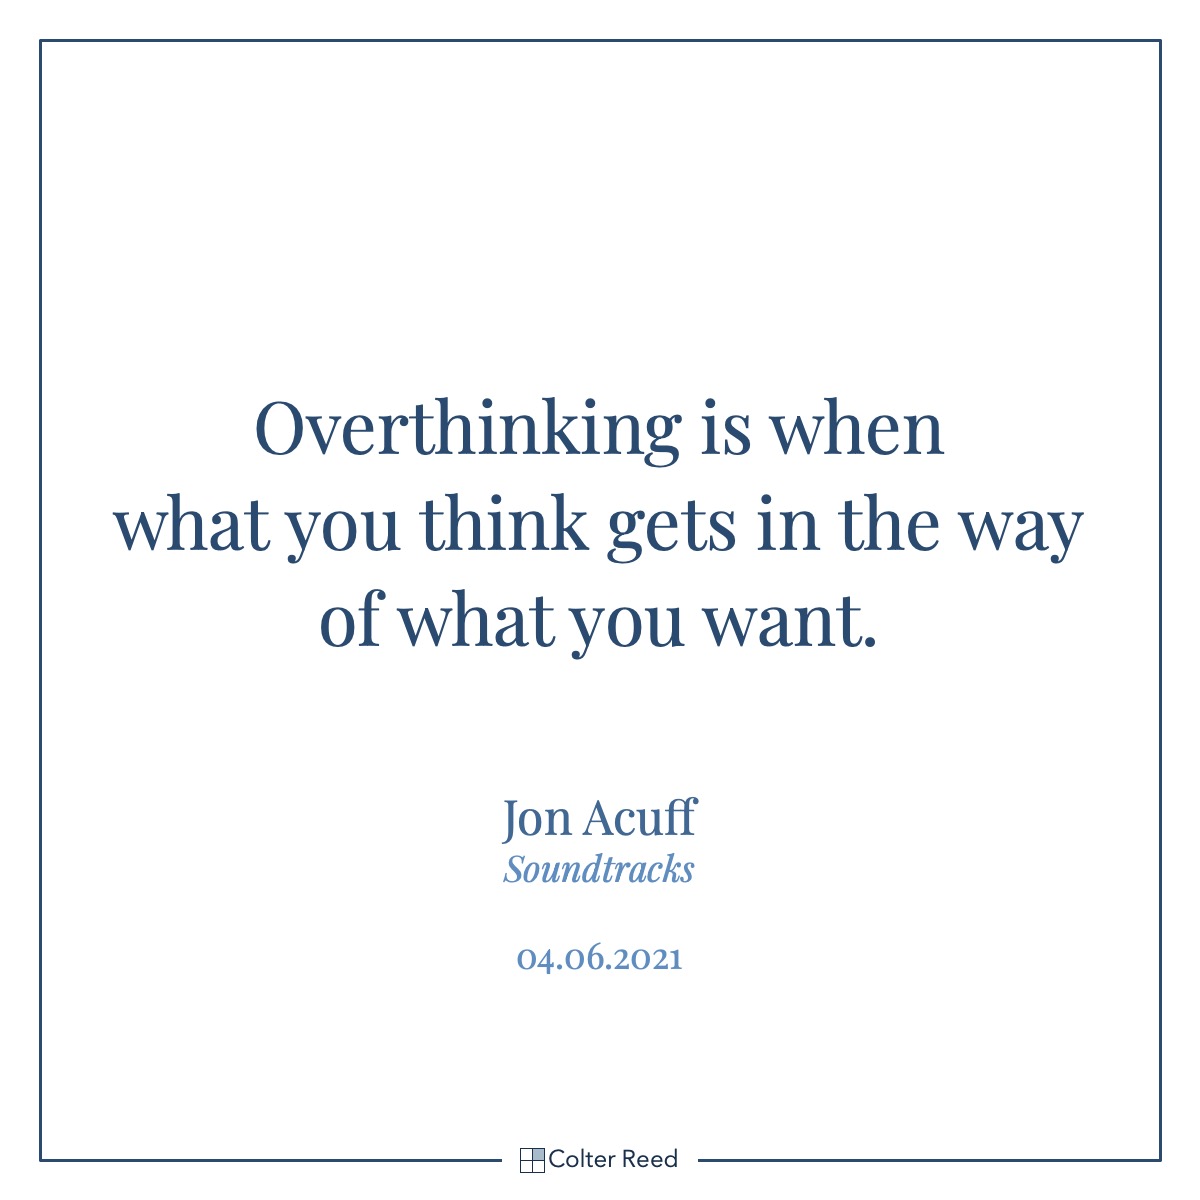 Overthinking is when what you think gets in the way of what you want. —Jon Acuff